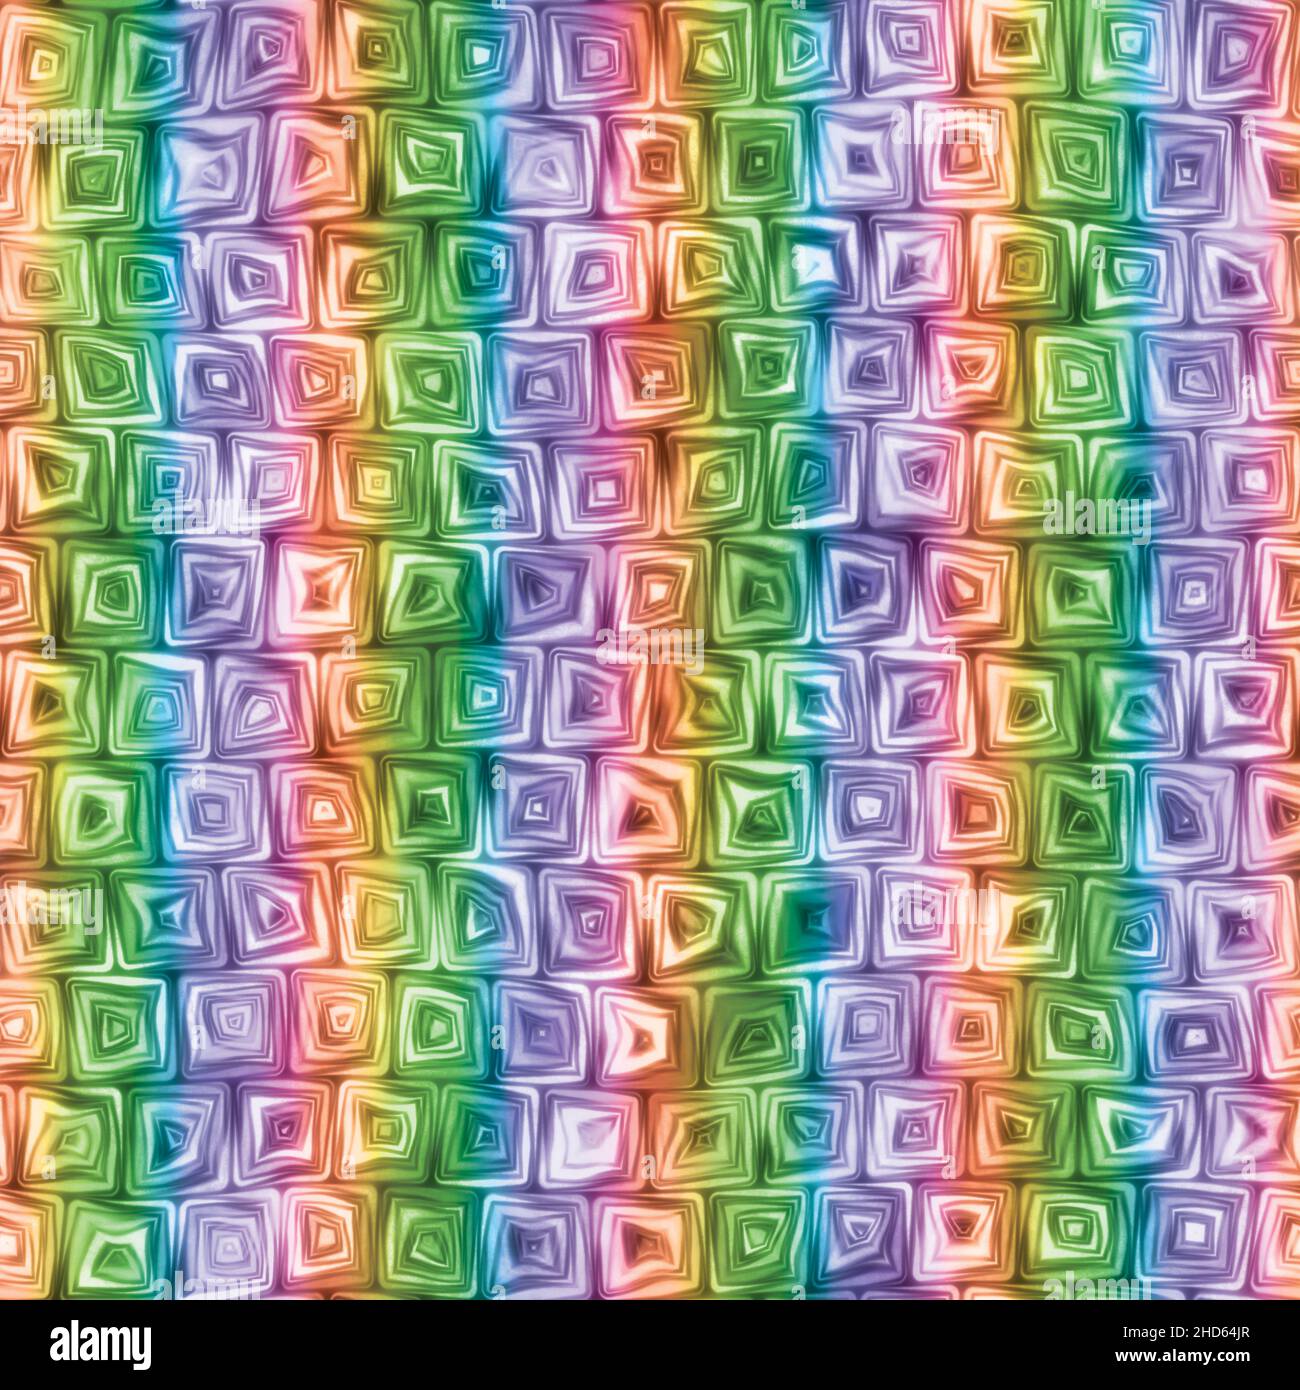 Tiny Rainbow Stripes Squiggly Swirly Spiral Squares Seamless Texture Pattern Stock Photo